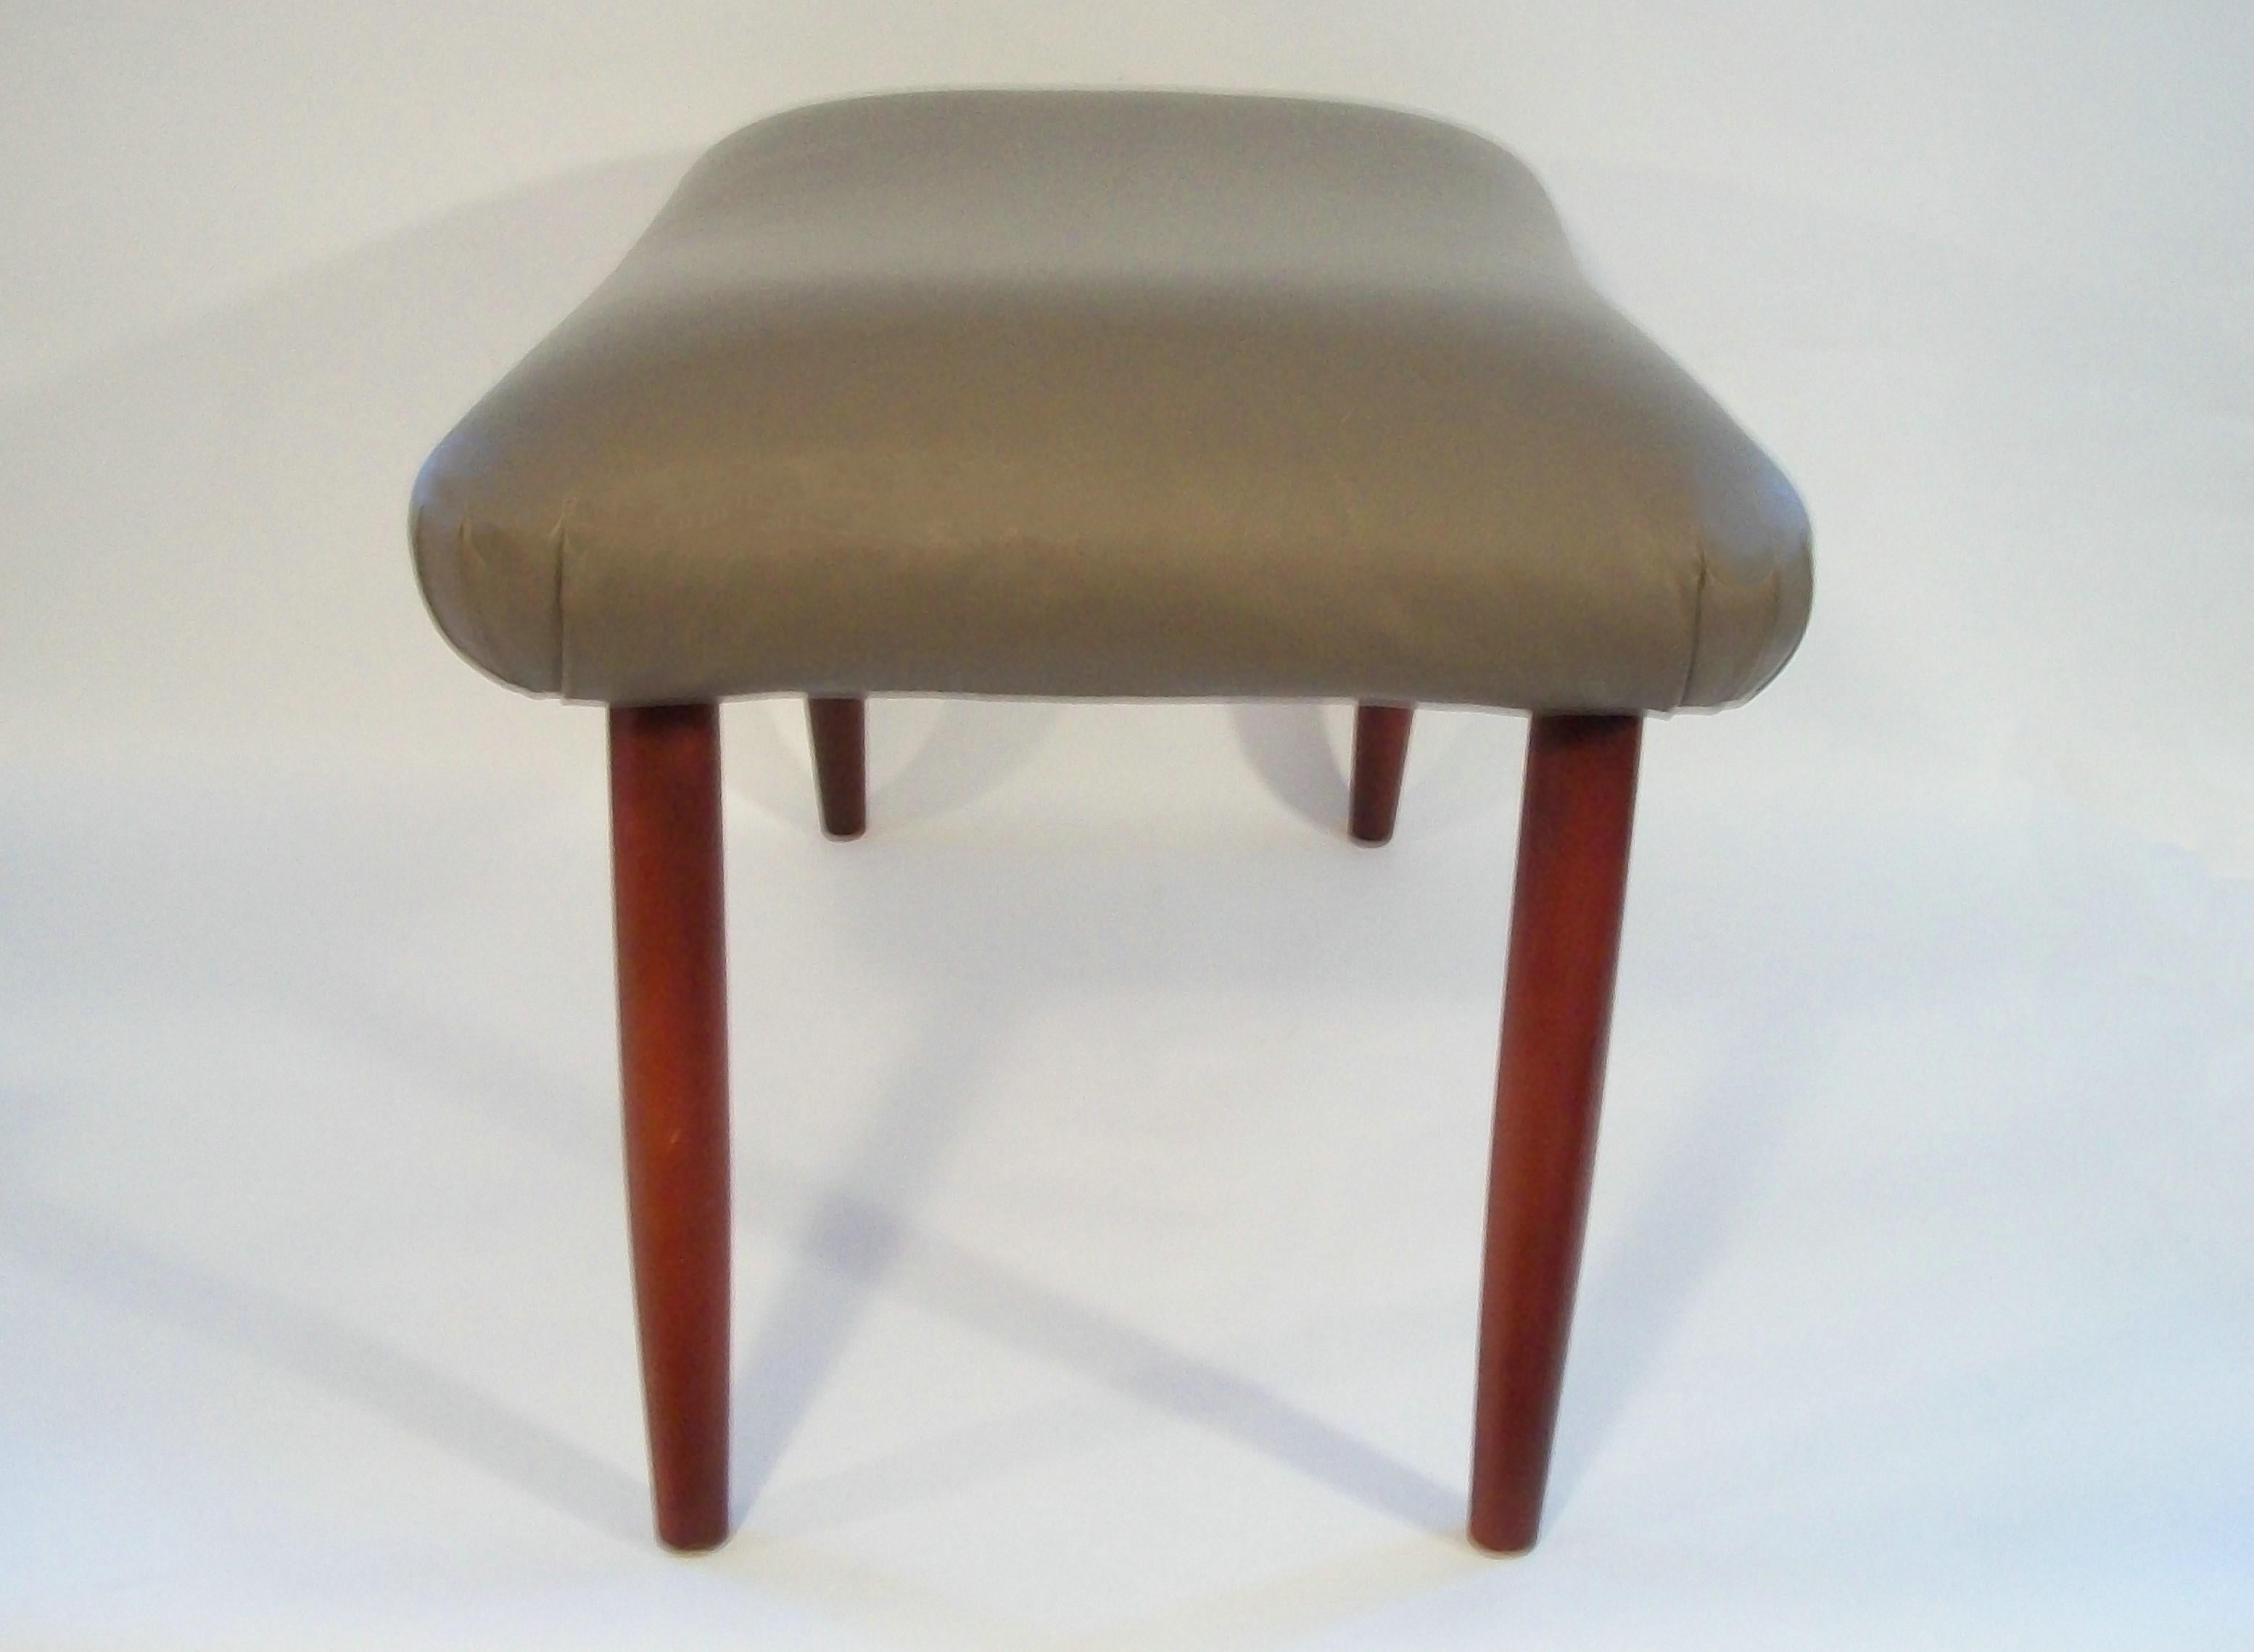 Mid Century Saddle Seat Foot Stool / Ottoman - Leather Upholstery - Circa 1980's For Sale 1